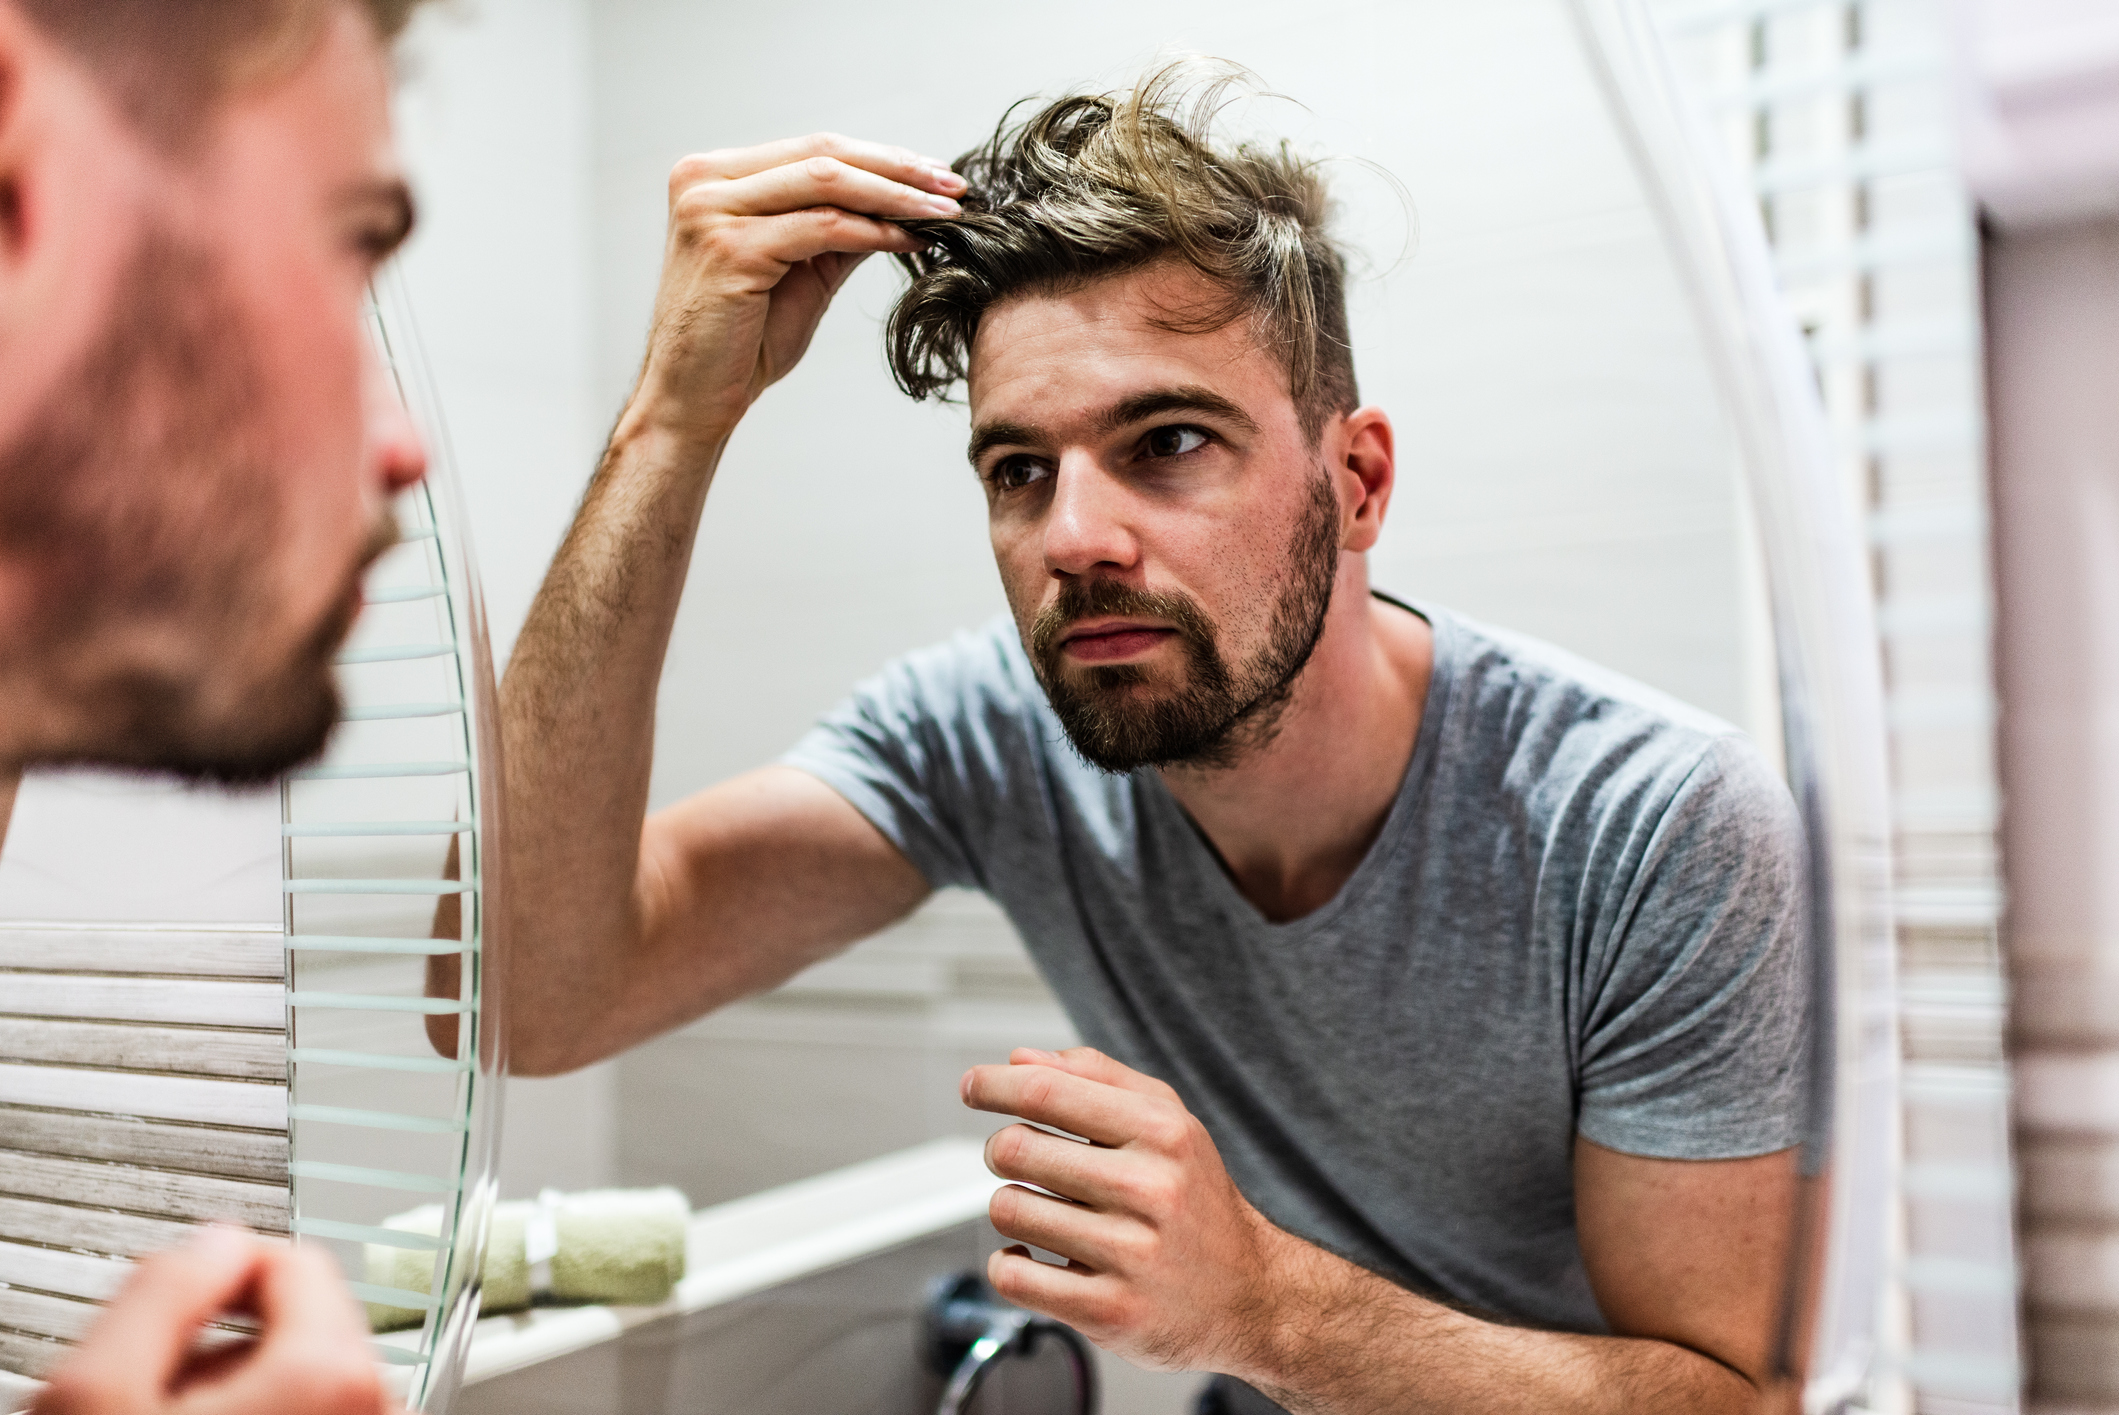 Man styling his hair after effective results of PRP hair restoration